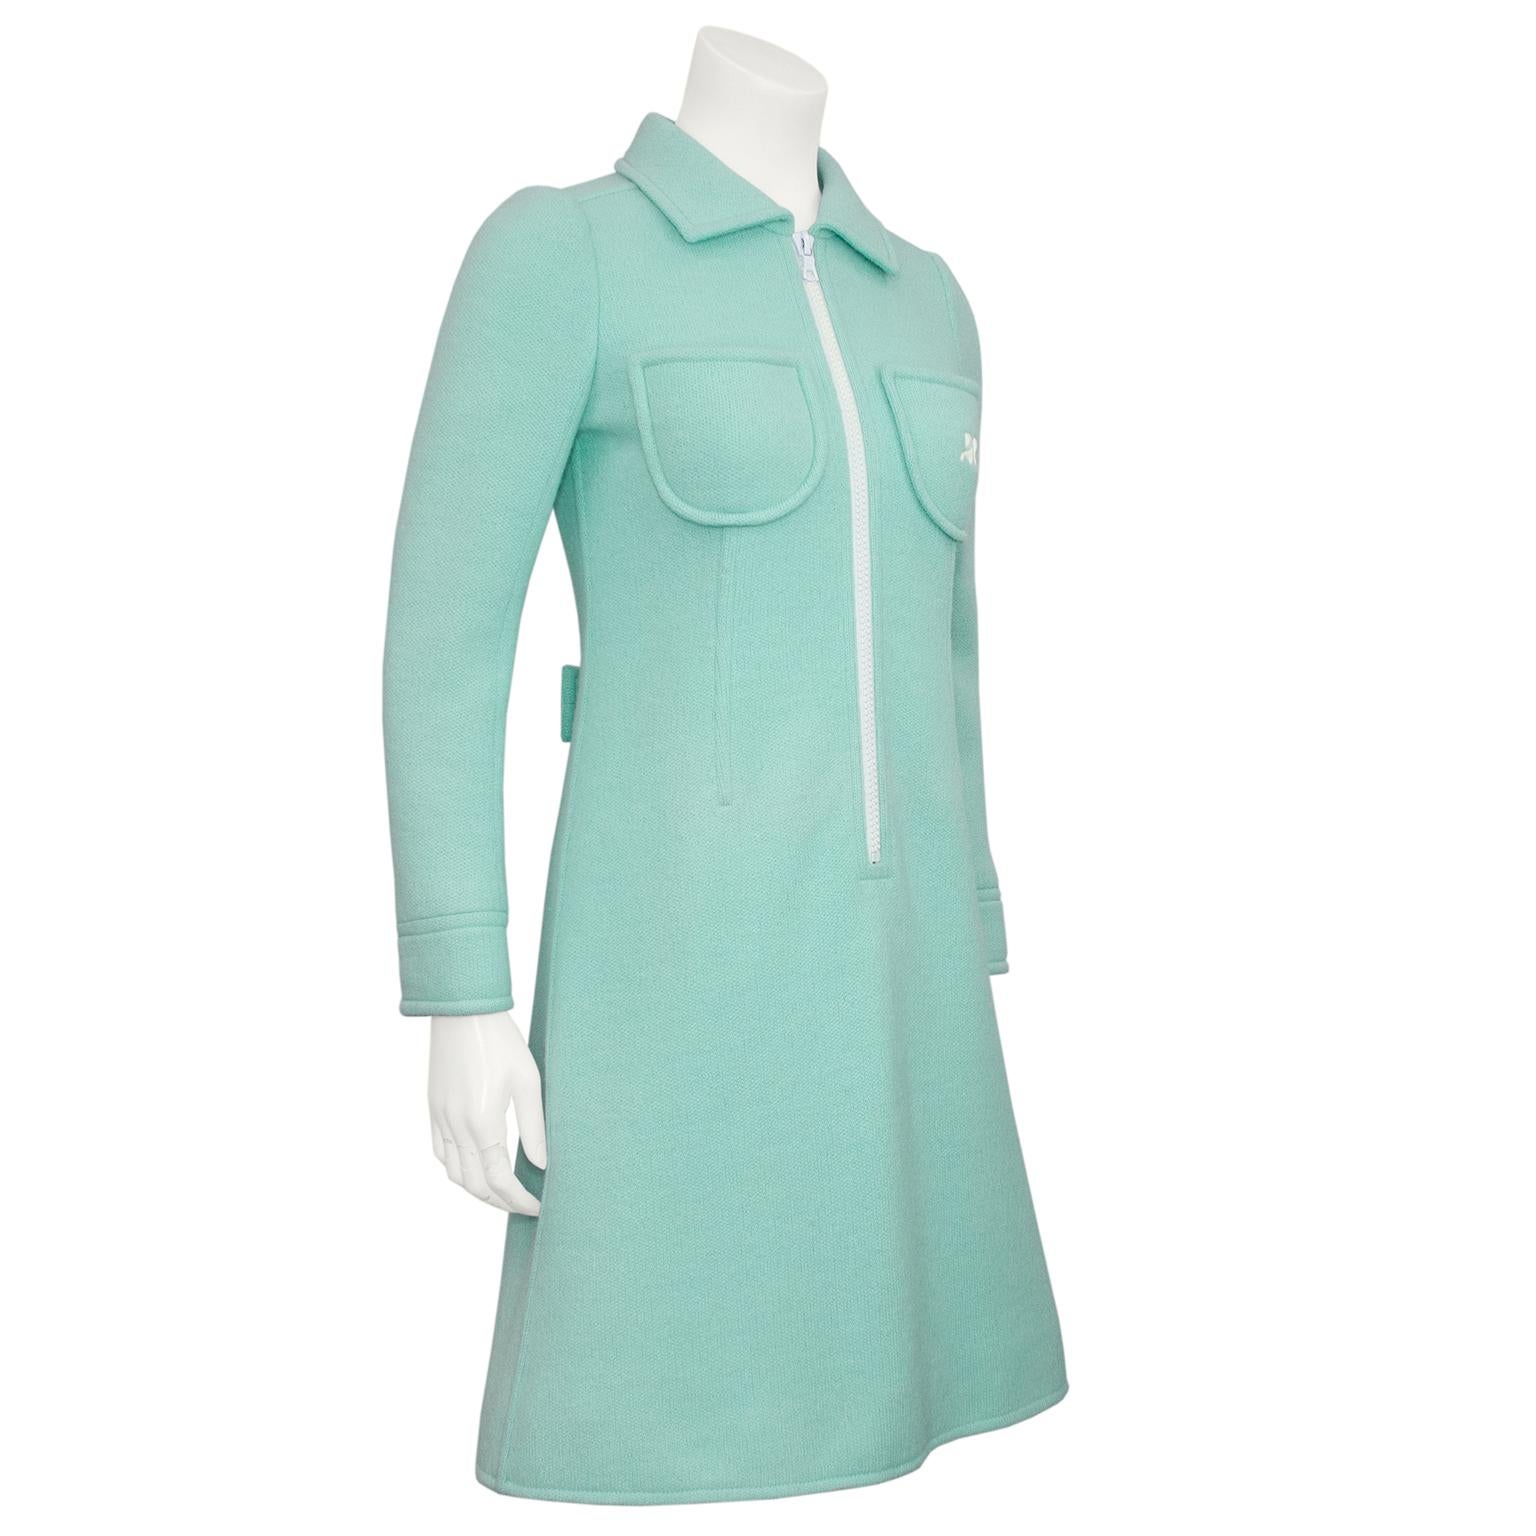 Deadstock vintage 1960's mint green wool knit jersey Courrèges dress. Purchased in late 1990's from an Australian shop that was going out of business with many pieces of untouched inventory for sale. This piece is Courrèges Hyperbole Size b which